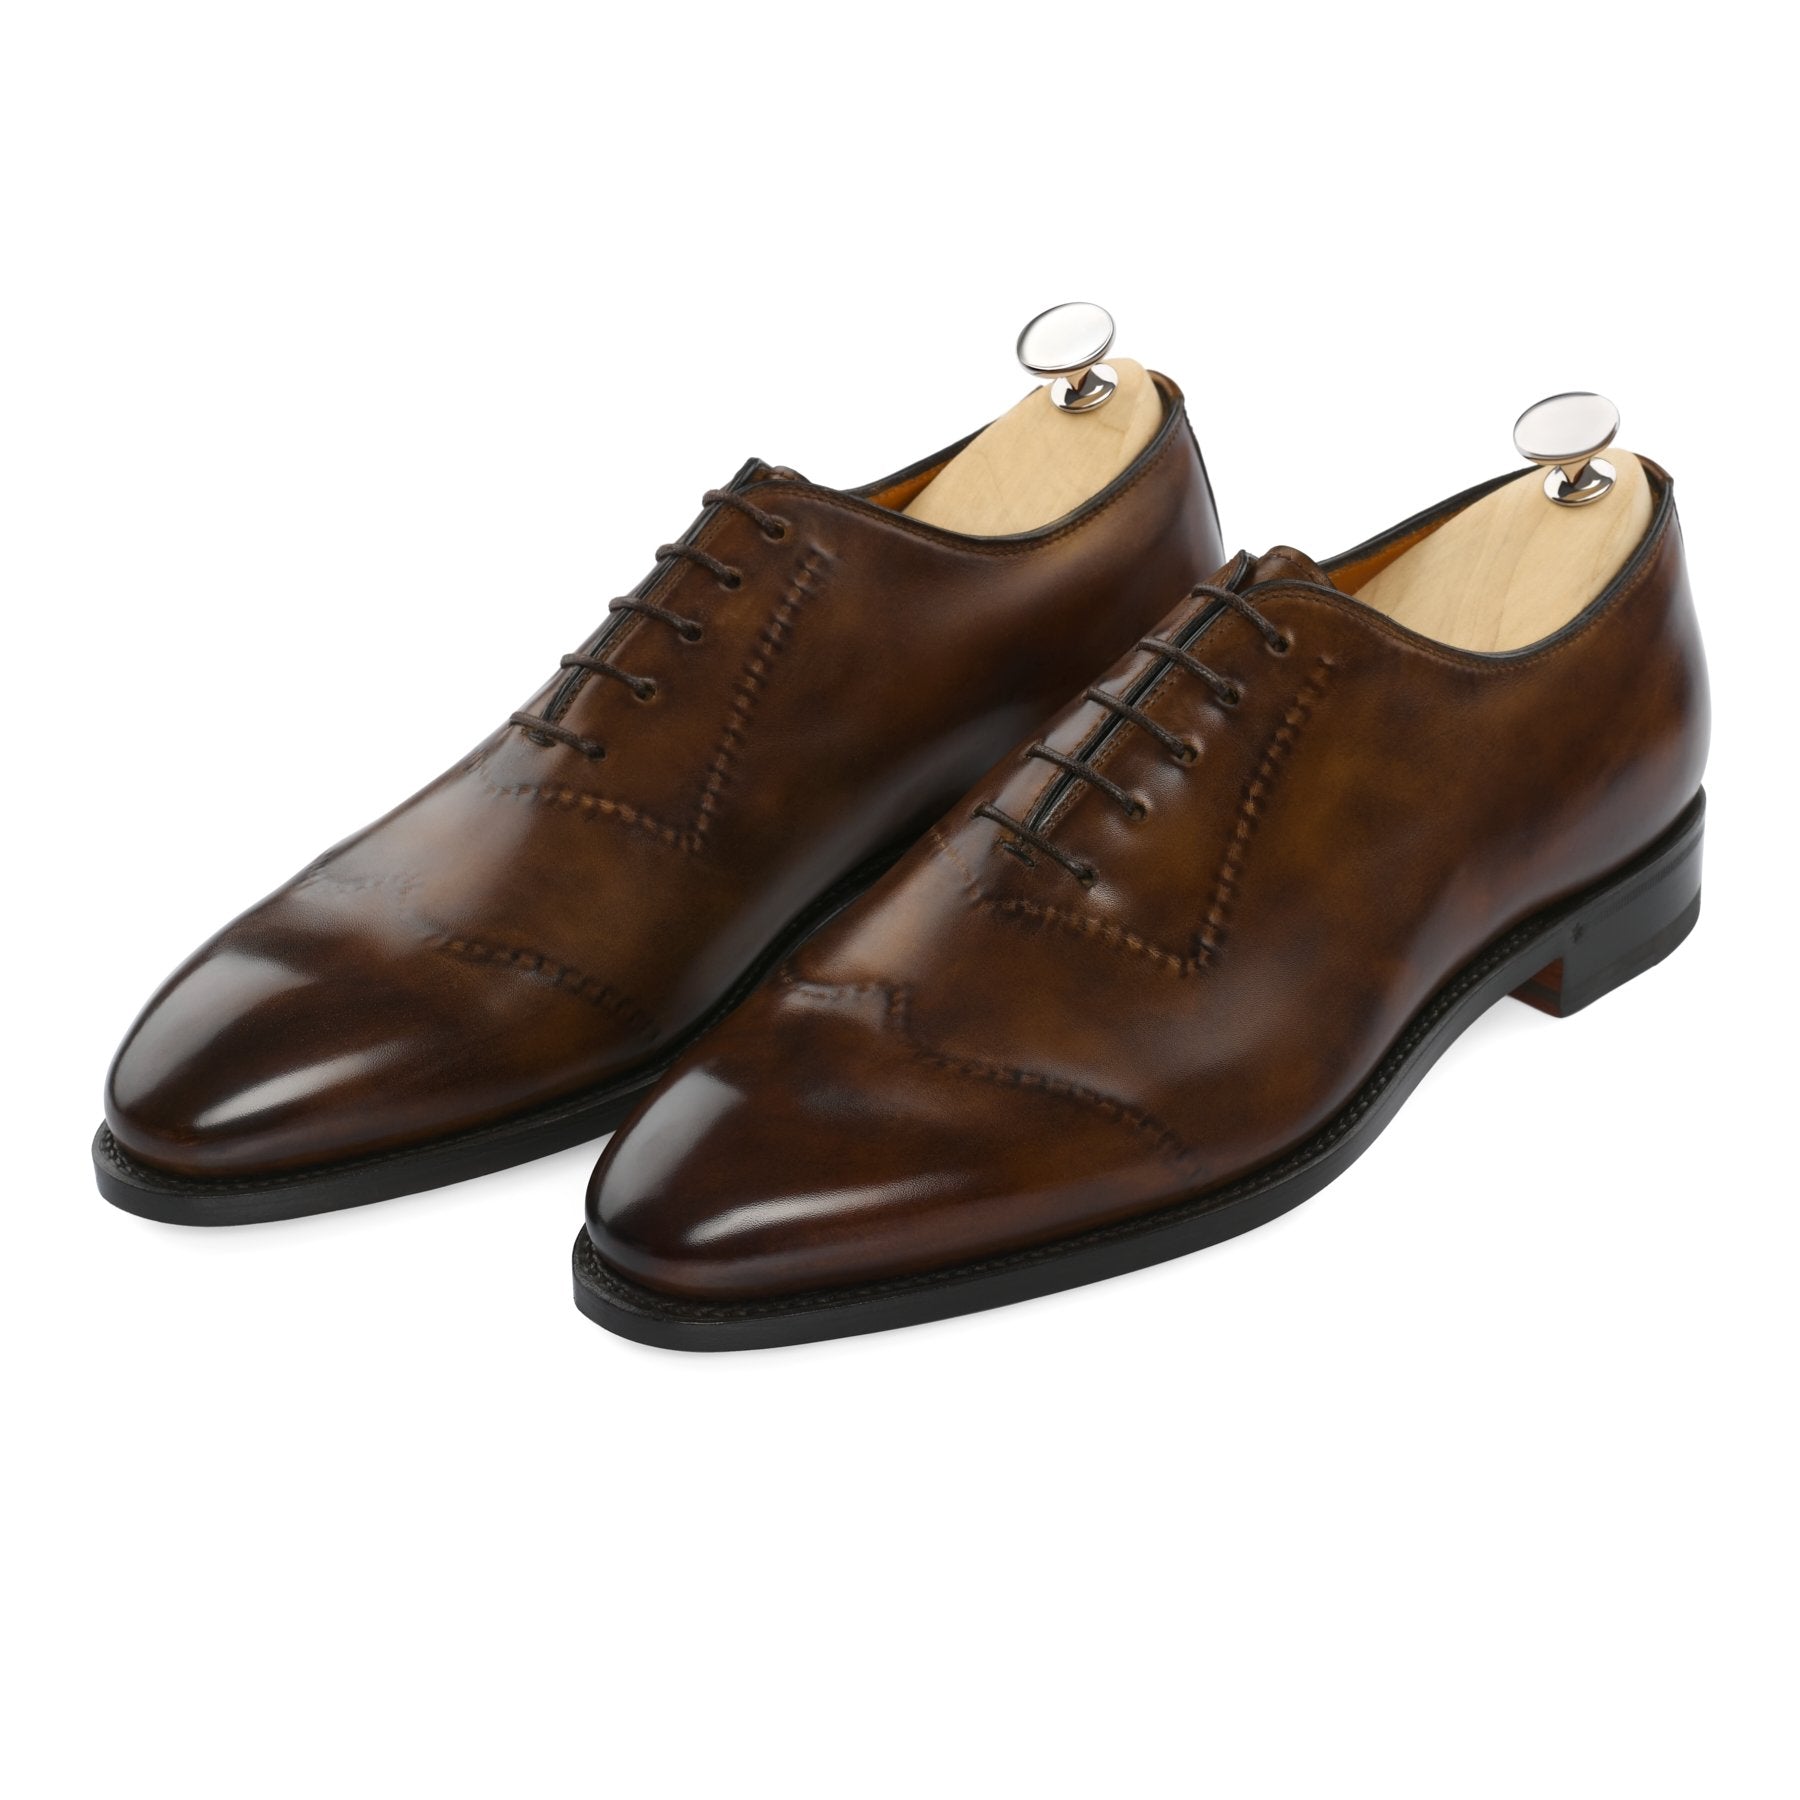 "Vittorio II" Five-Eyelet Oxford with Hand-Stitched Reversed Details